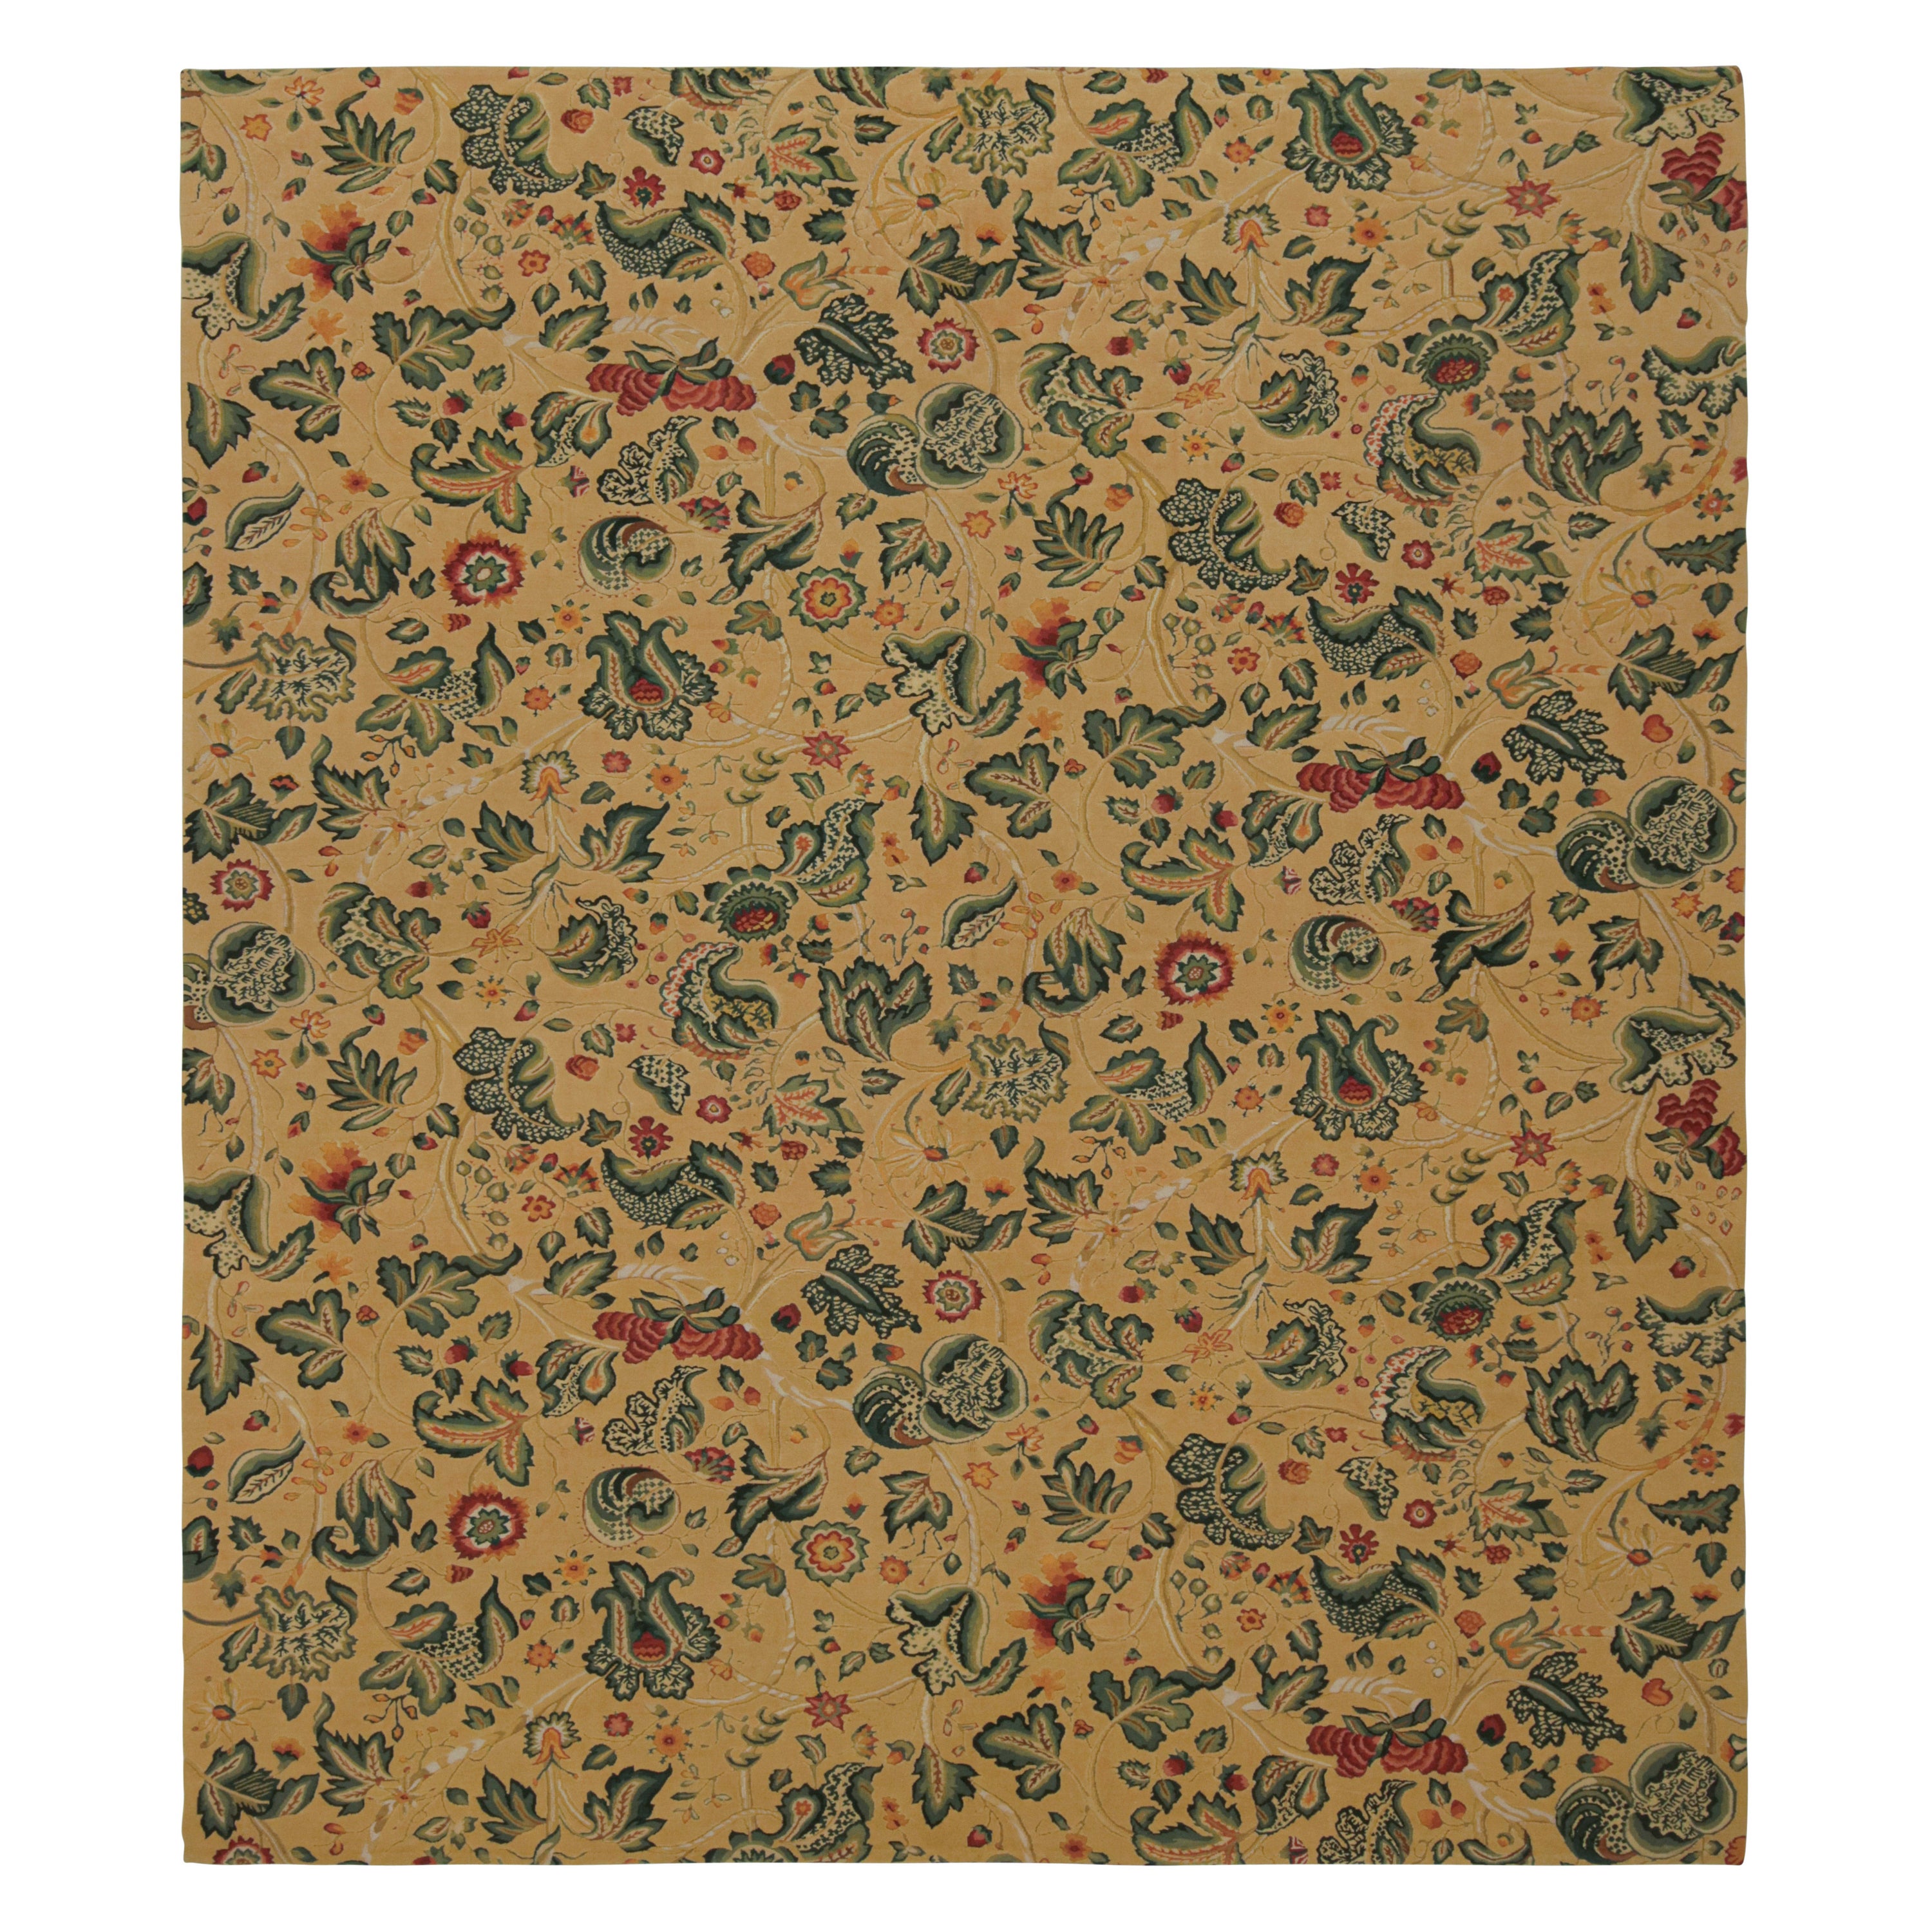 Rug & Kilim’s European Style Flatweave Rug in Cream with Floral Patterns ‘Tudor’ For Sale